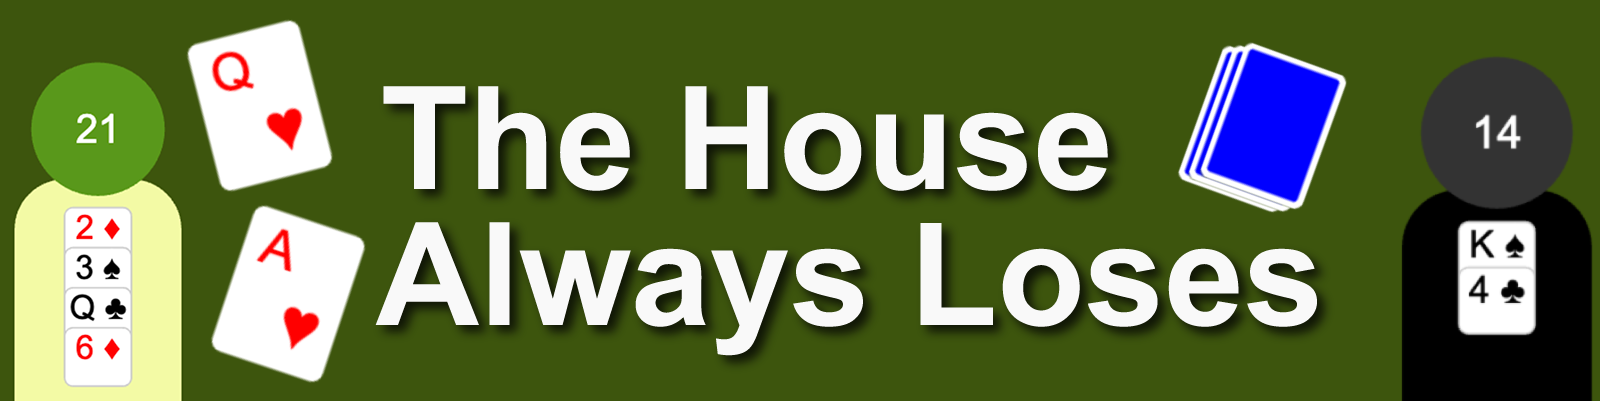 The House Always Loses